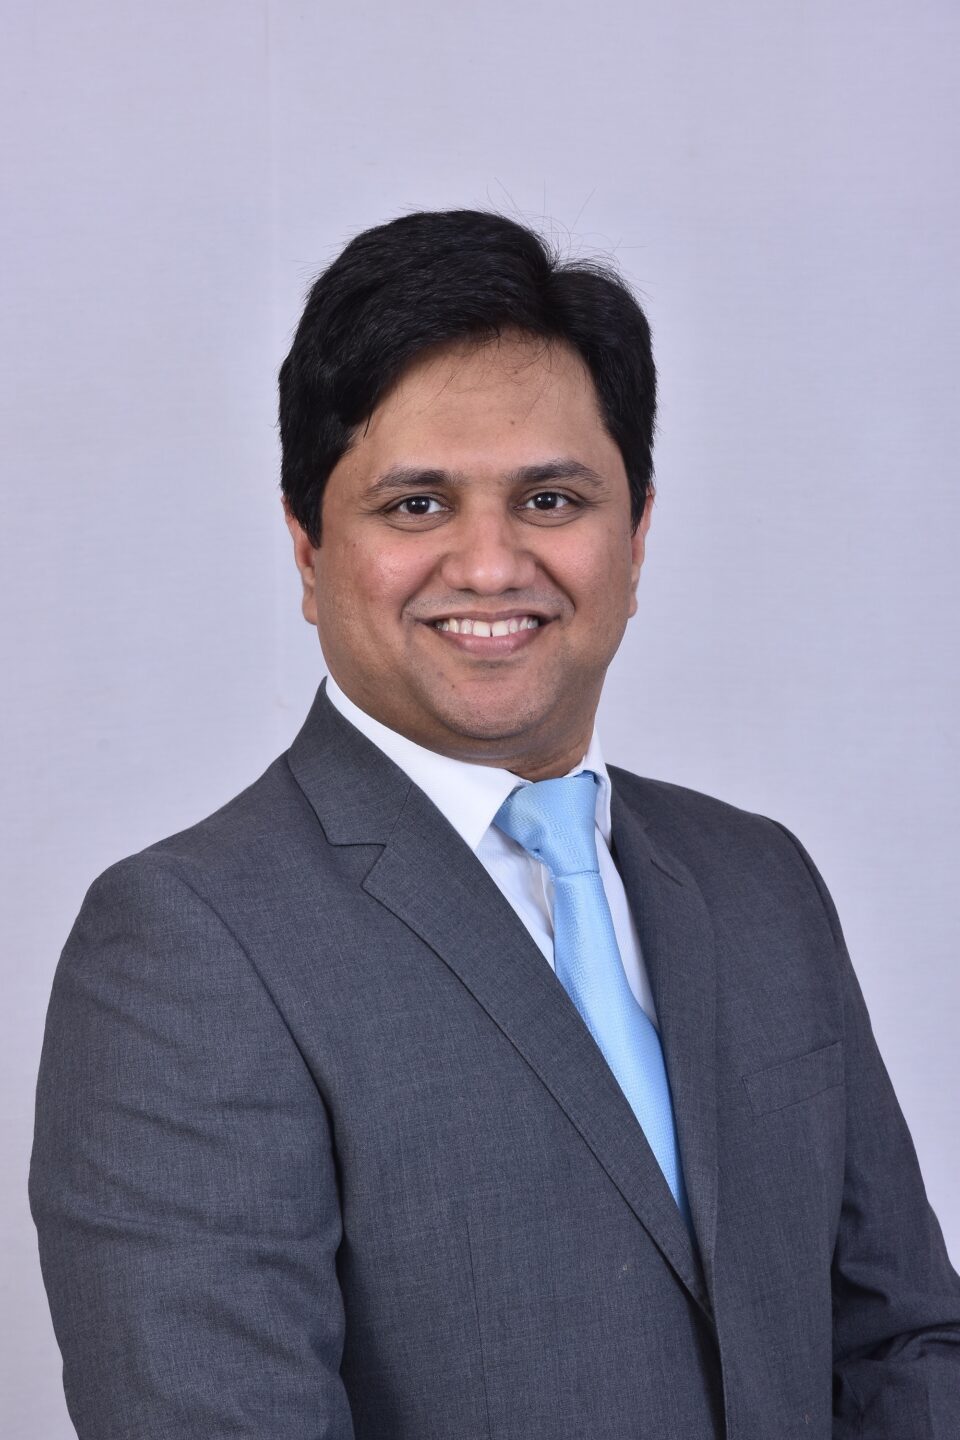 Edelweiss Mutual Fund Continues to Strengthen its Investment Team Appoints Aniruddha Kekatpure as Head of Research